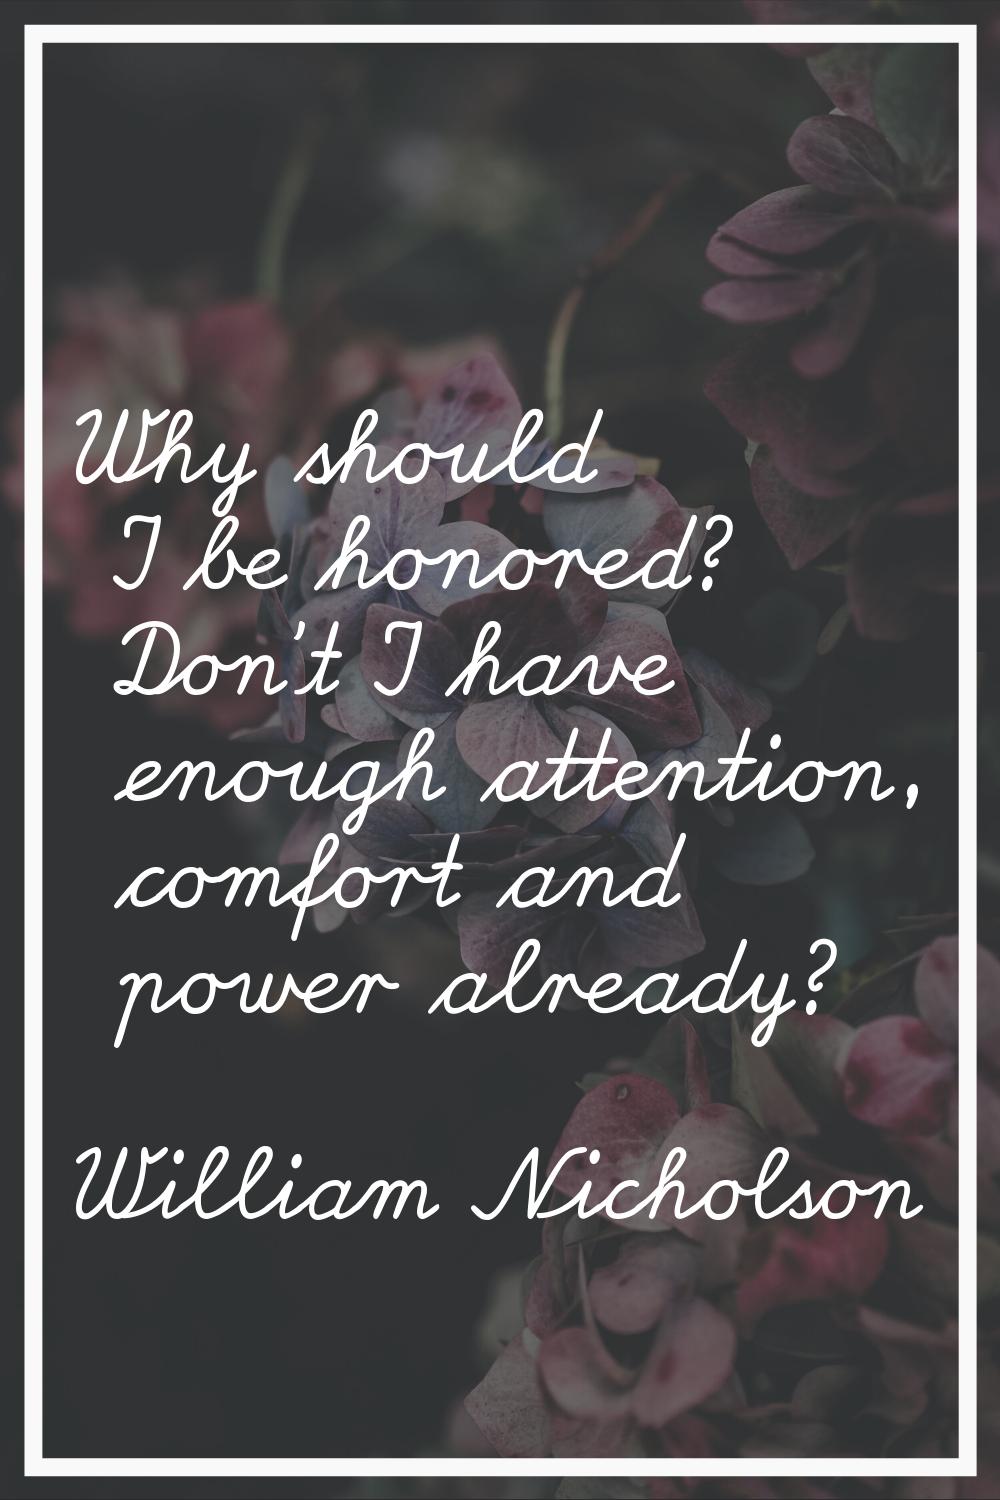 Why should I be honored? Don't I have enough attention, comfort and power already?